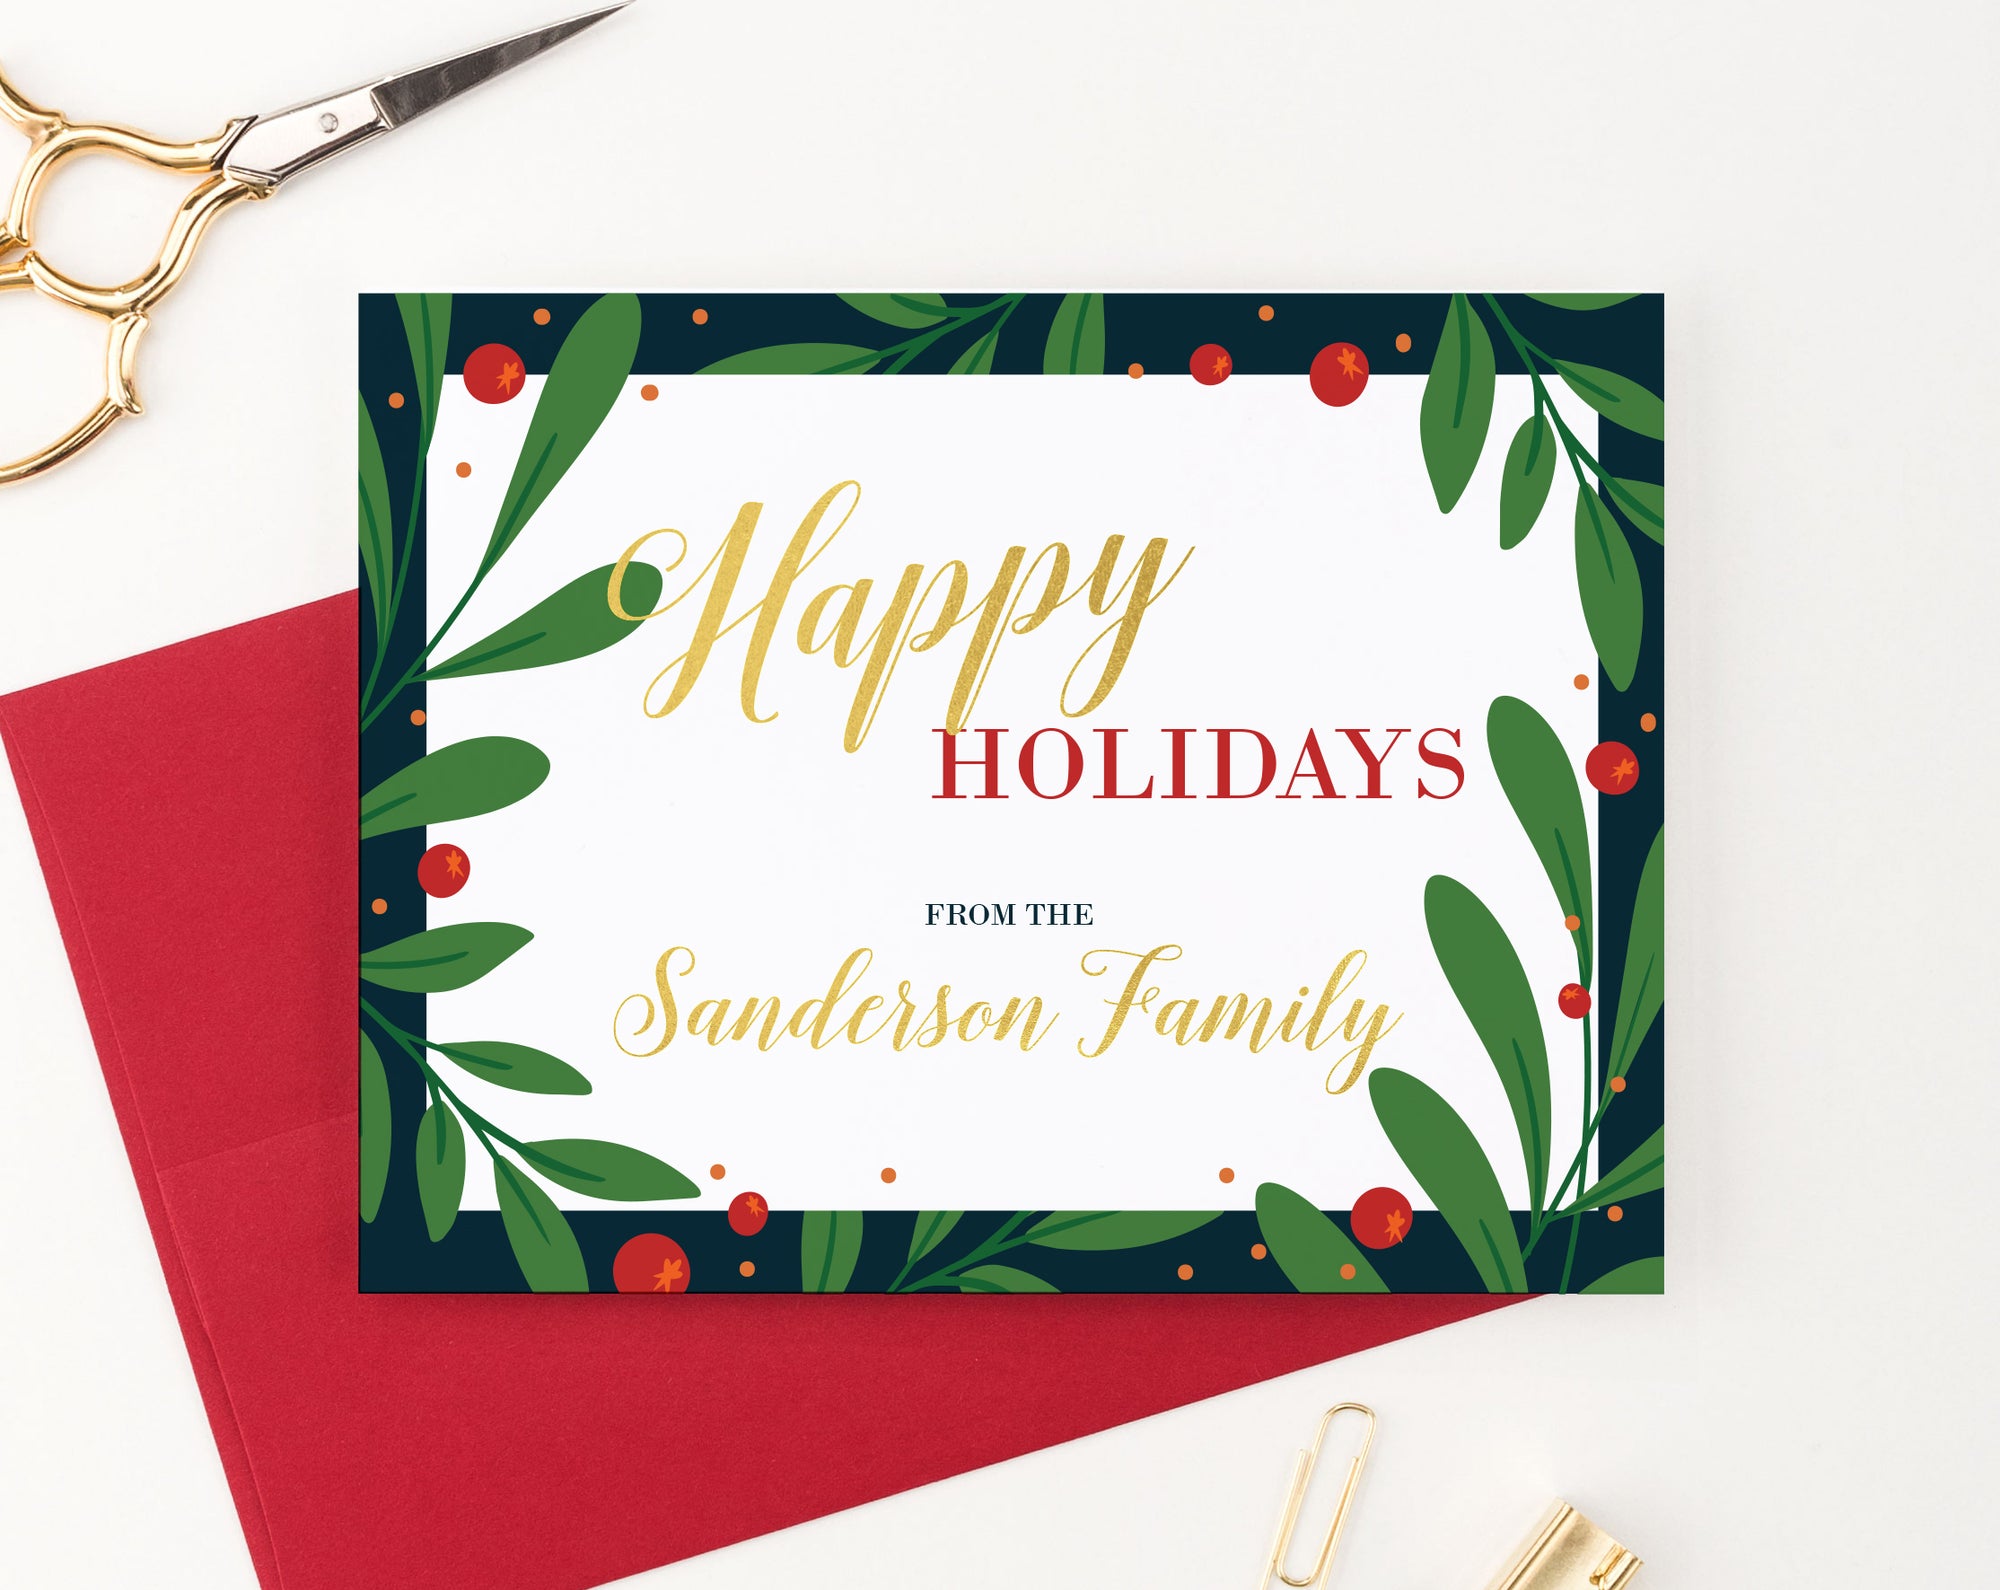 Printed Holiday Cards For Business